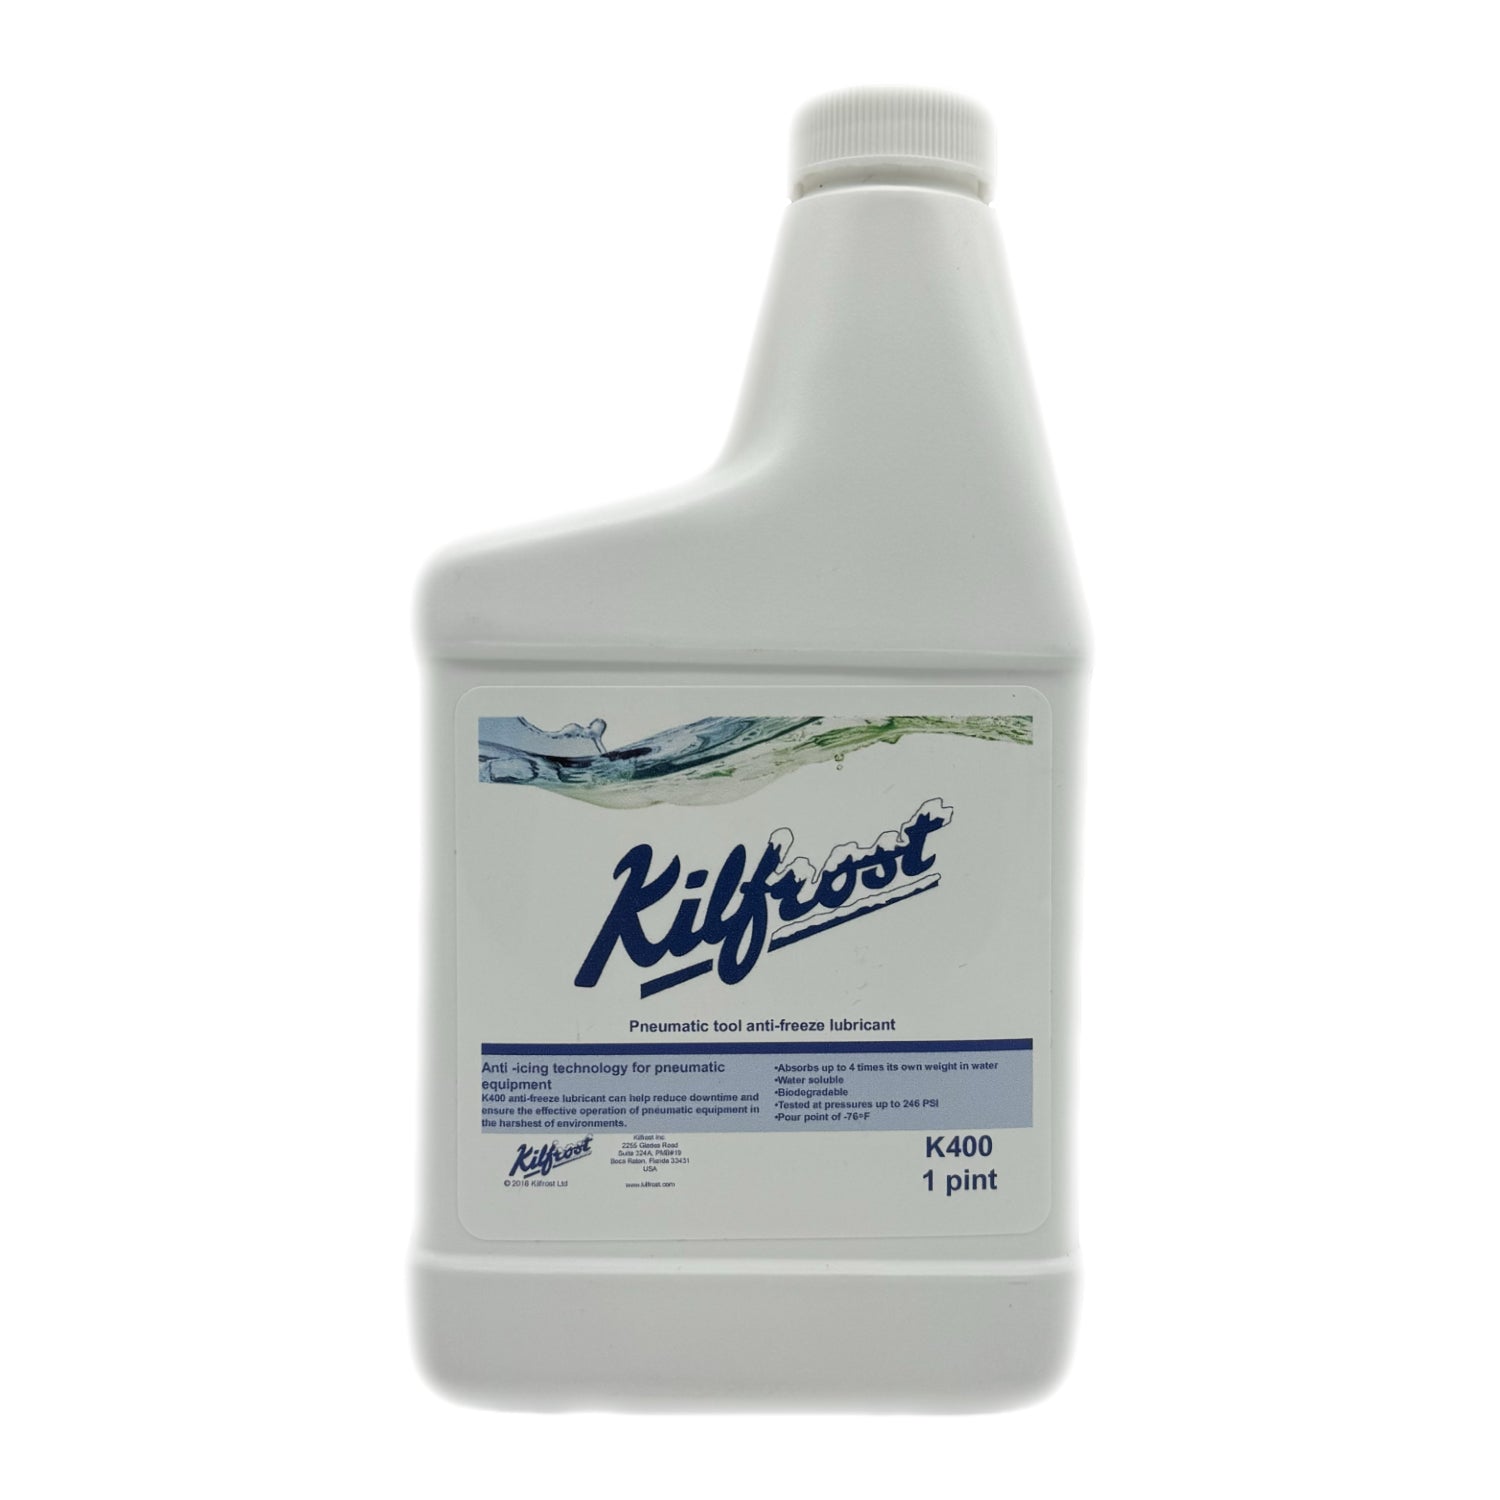 Kilfrost K400 Pneumatic Anti-Freeze Air Line and Tool Lubricant - 1 Pint